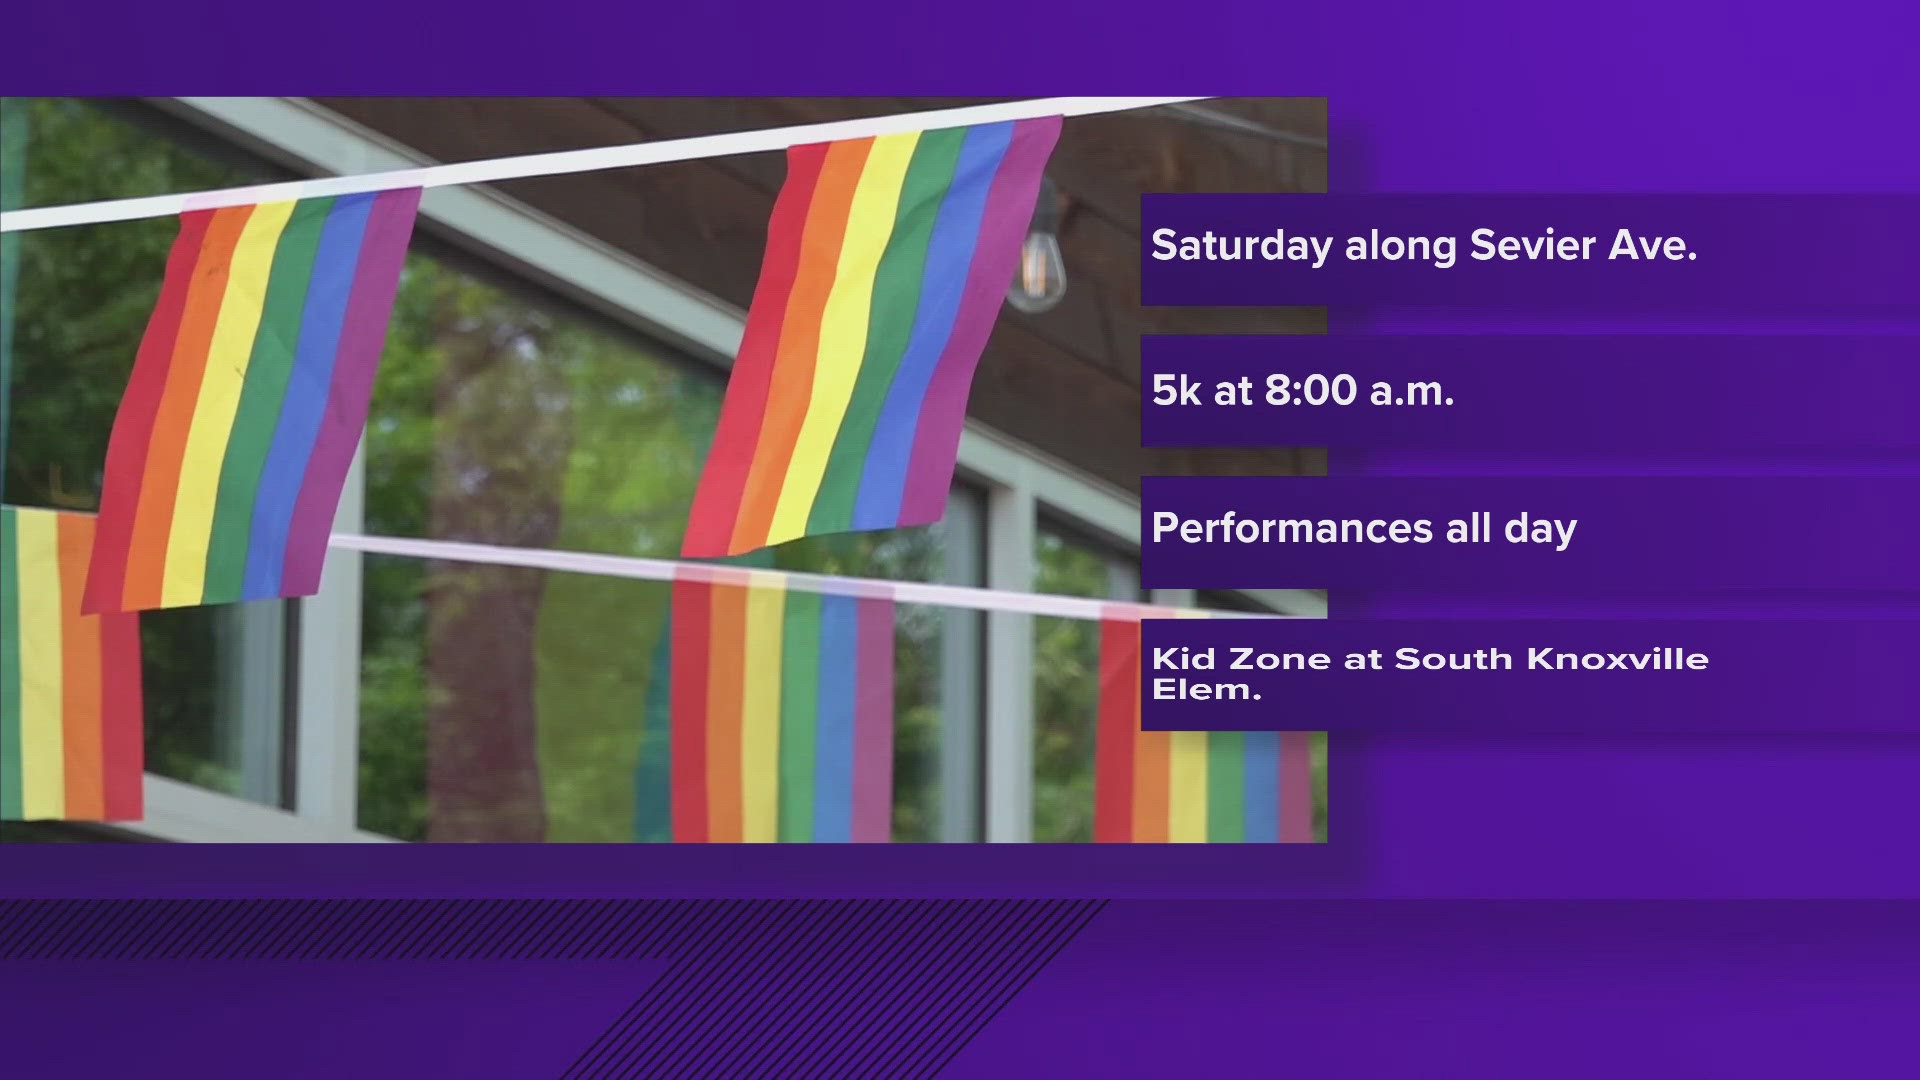 People will be invited to Sevier Avenue on Saturday for an all-day celebration featuring drag performances, music, a vendor market and more.